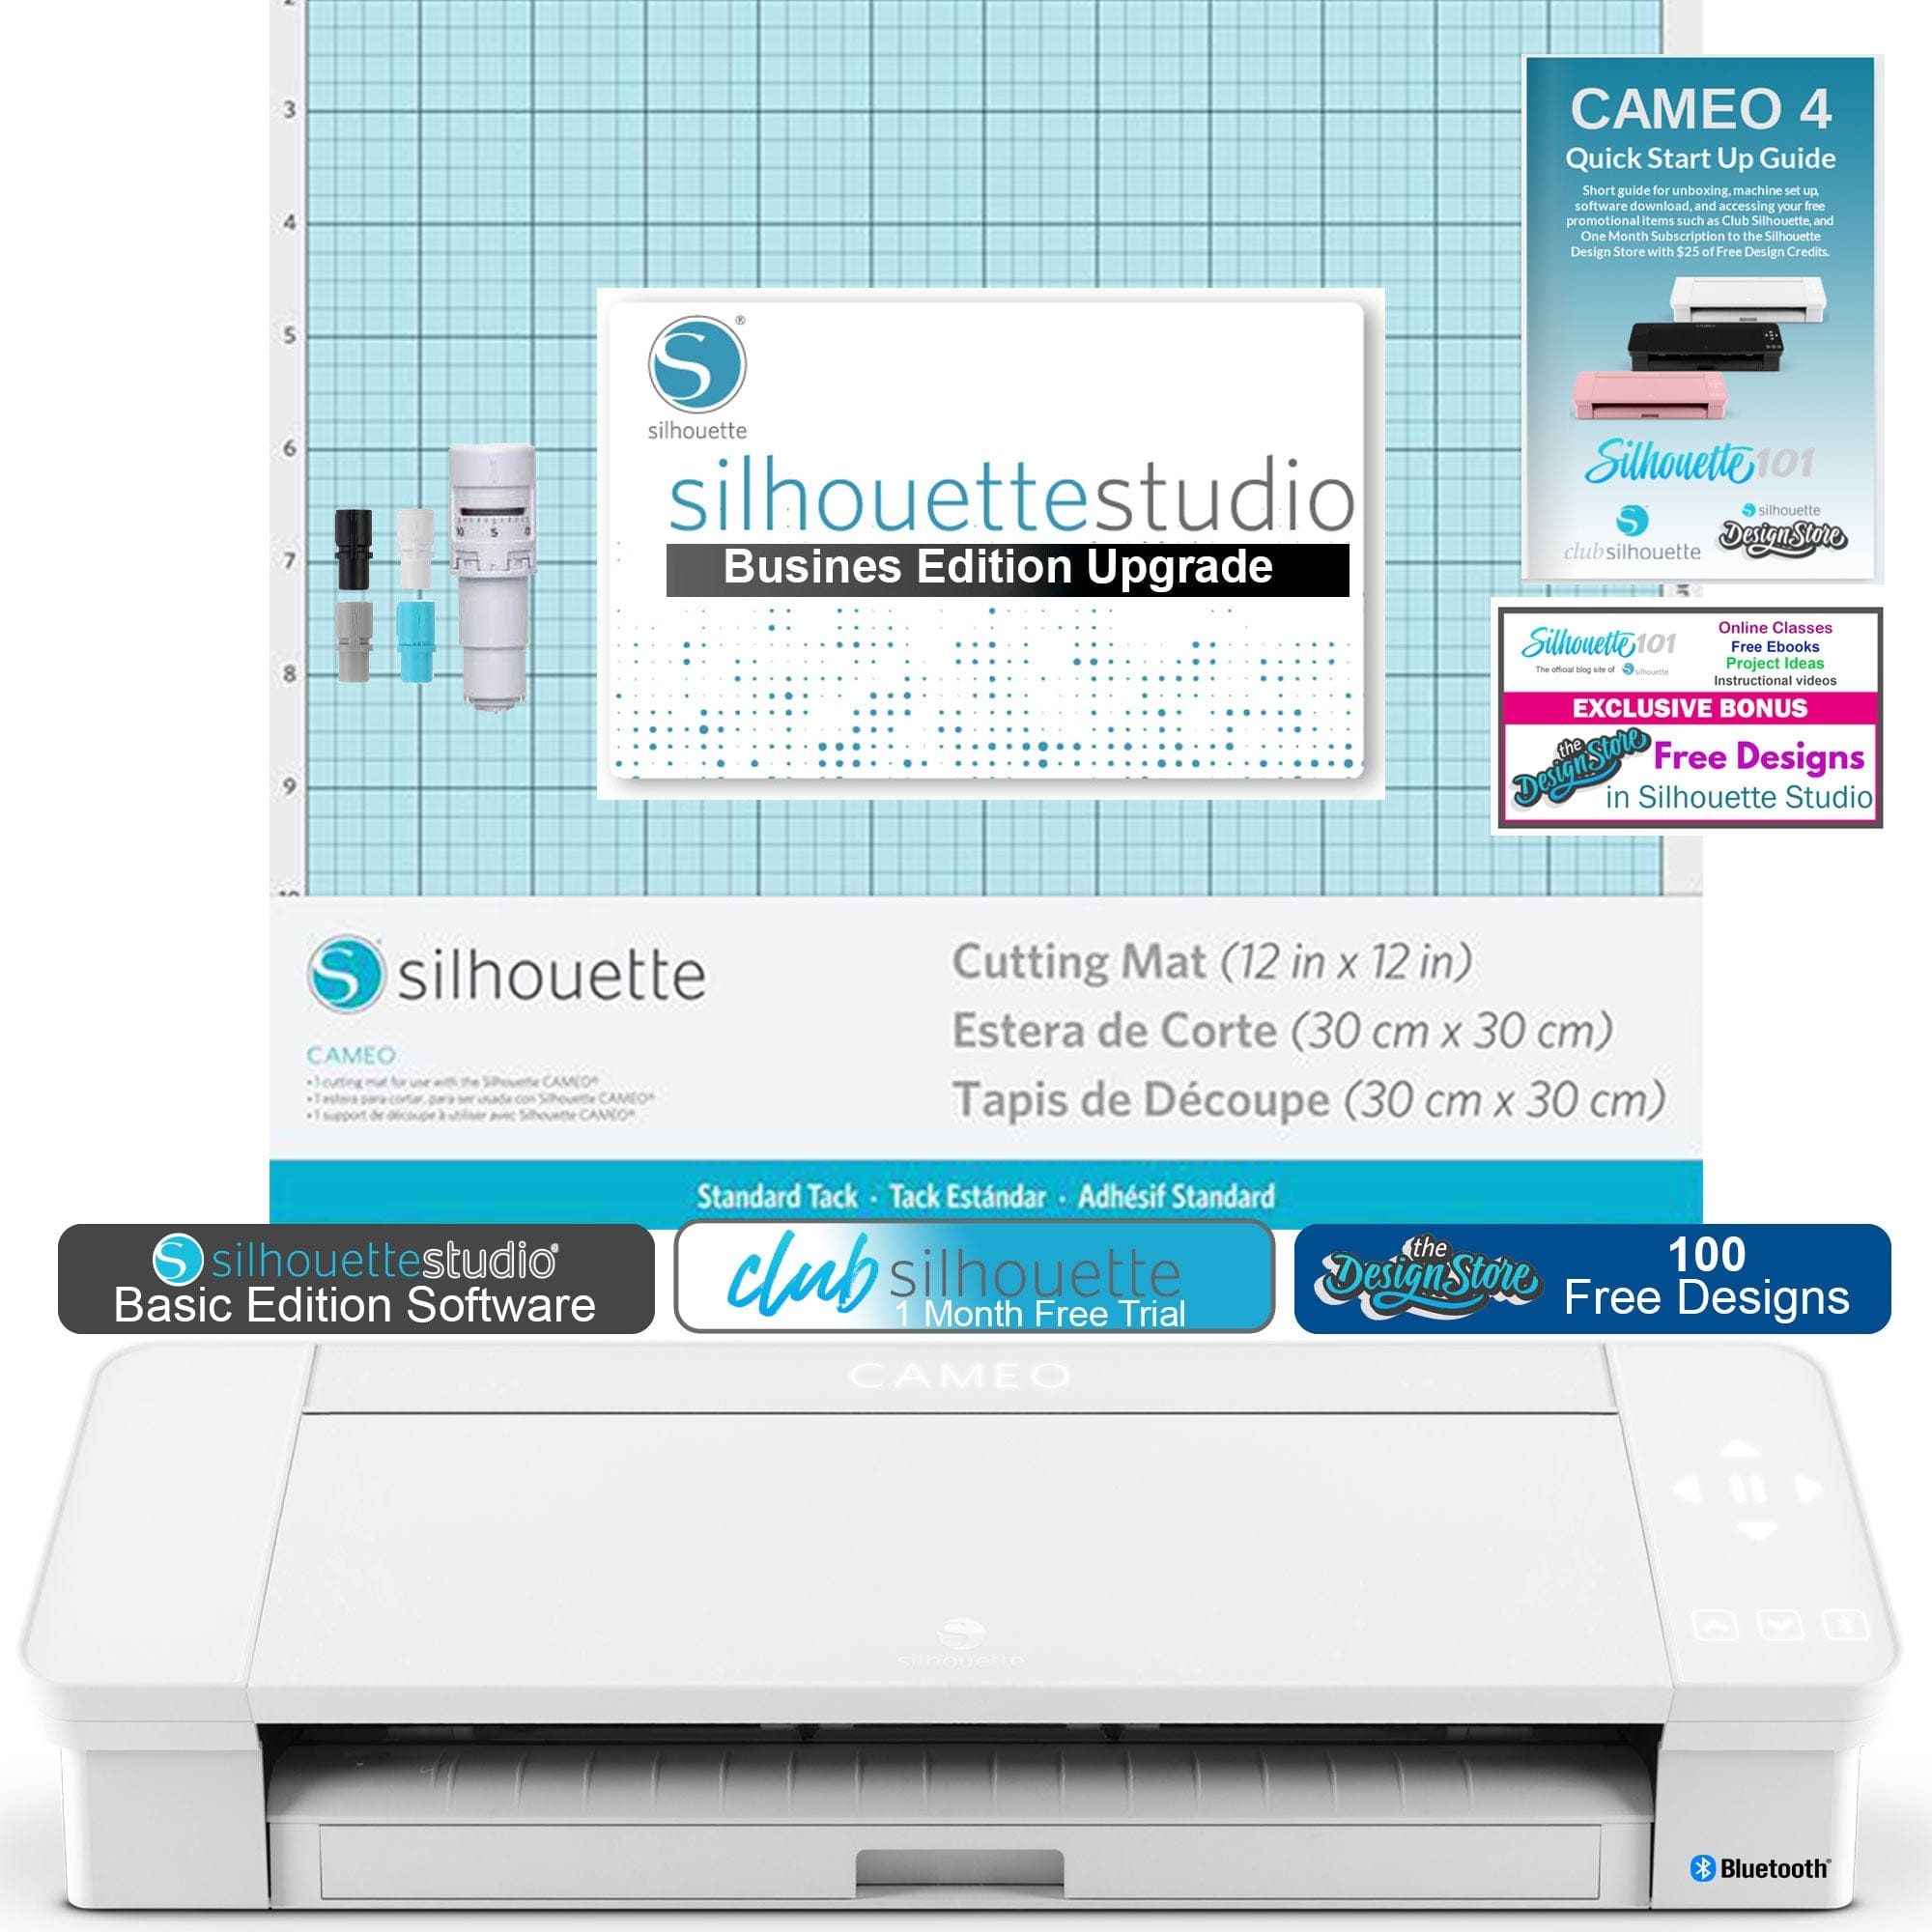 Silhouette America Silhouette Cameo 4 12" Vinyl Cutting White Edition Bundle with Silhouette Studio Business Edition Software